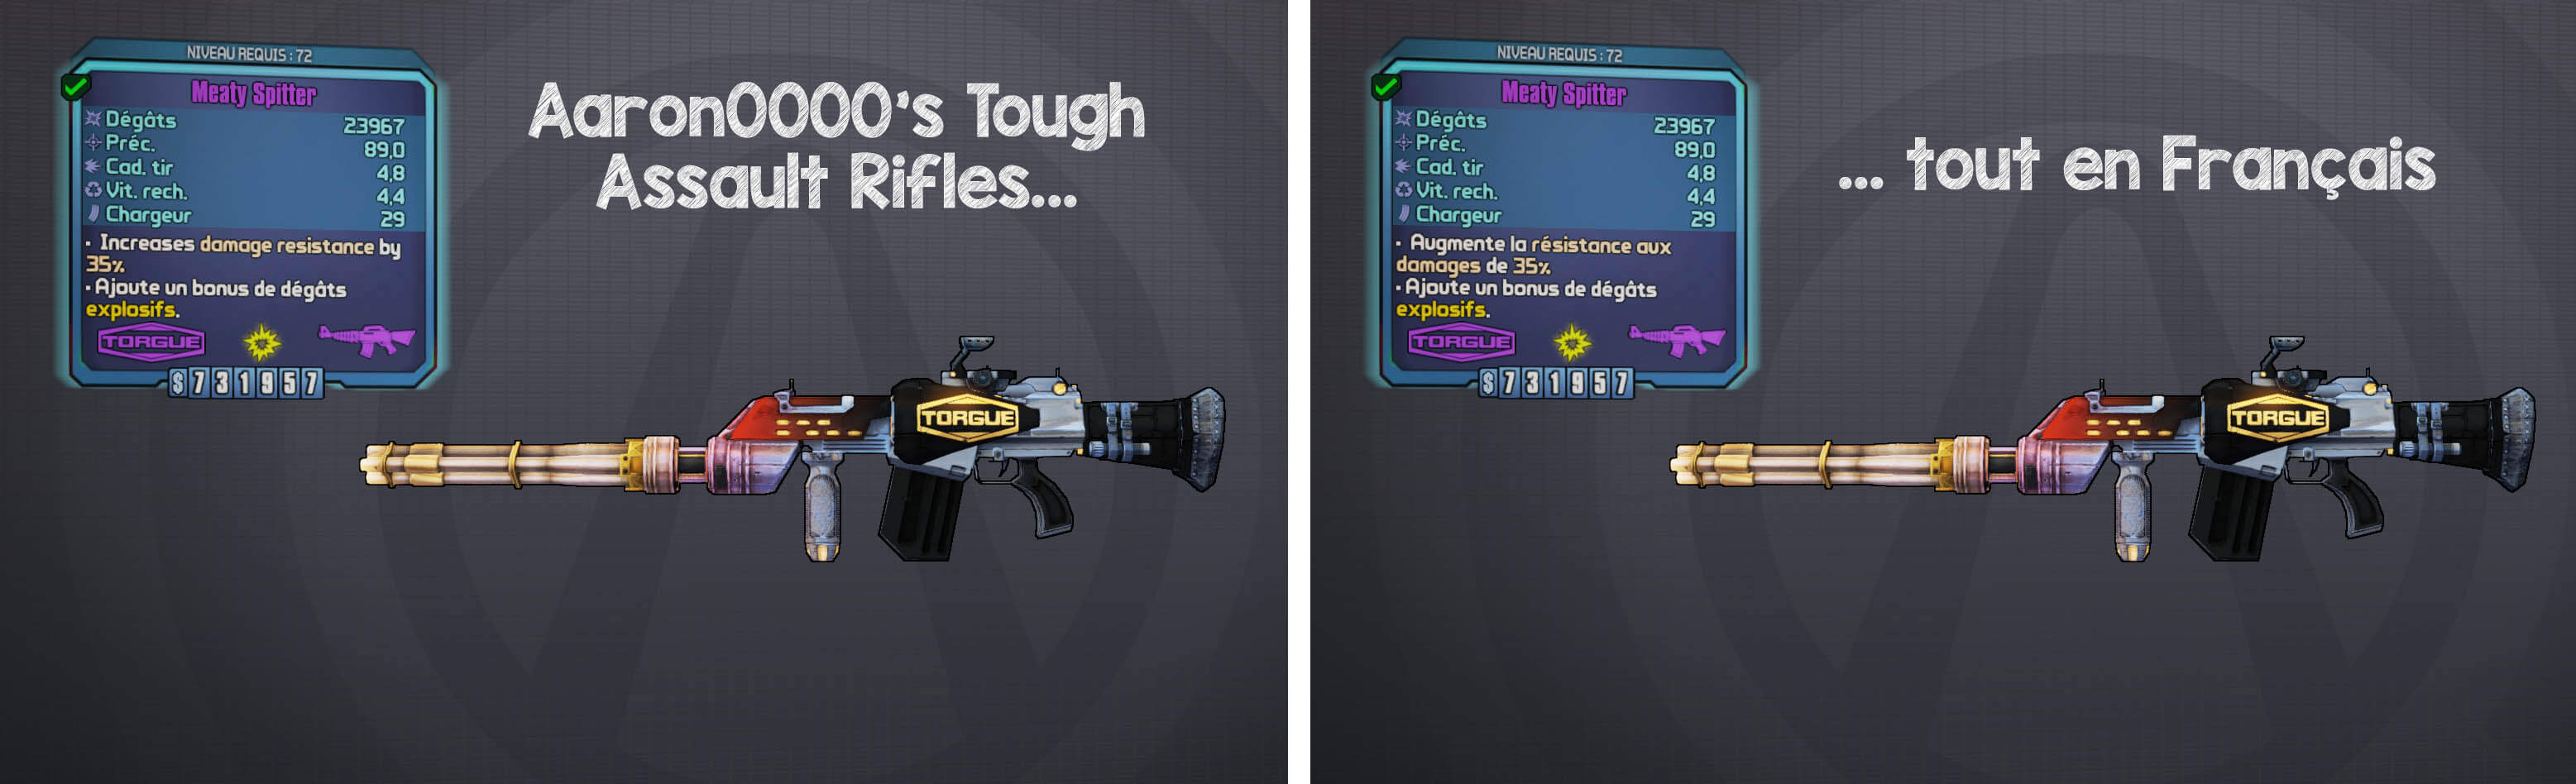 BL2 - Aaron0000's Though Assault Rifles French Translation